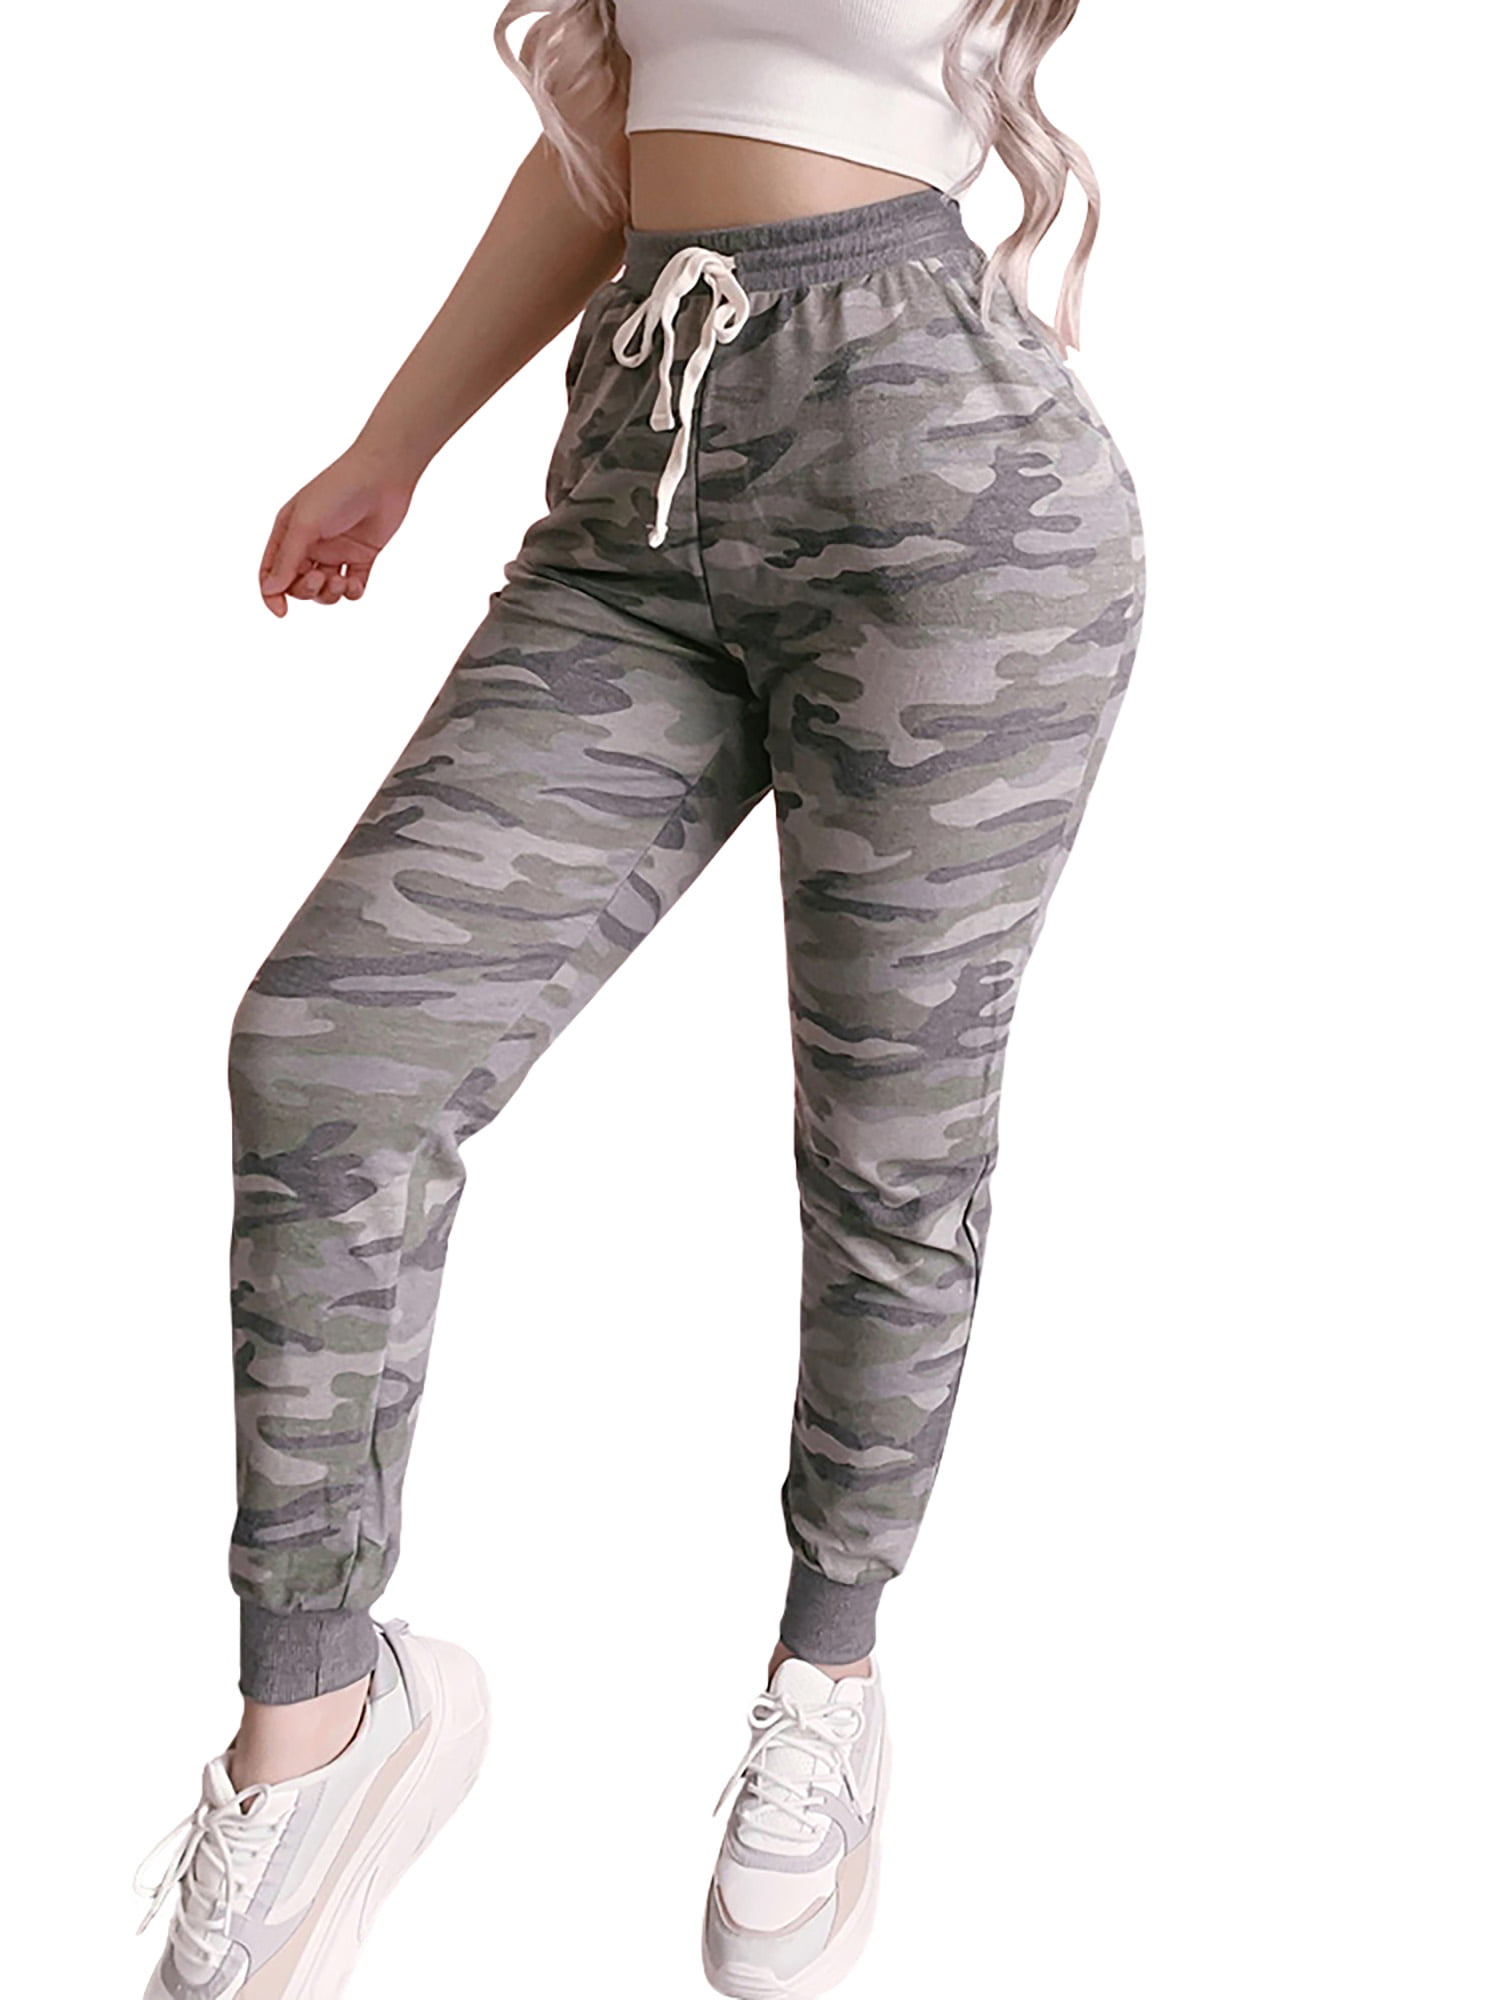 Junhouse Womens Casual Drawstring Elastic Waist Trousers Camo Trousers Jogging Jogger Pants Sports Gym Military Army Print Tracksuit Bottoms Stretchy Workout Trousers